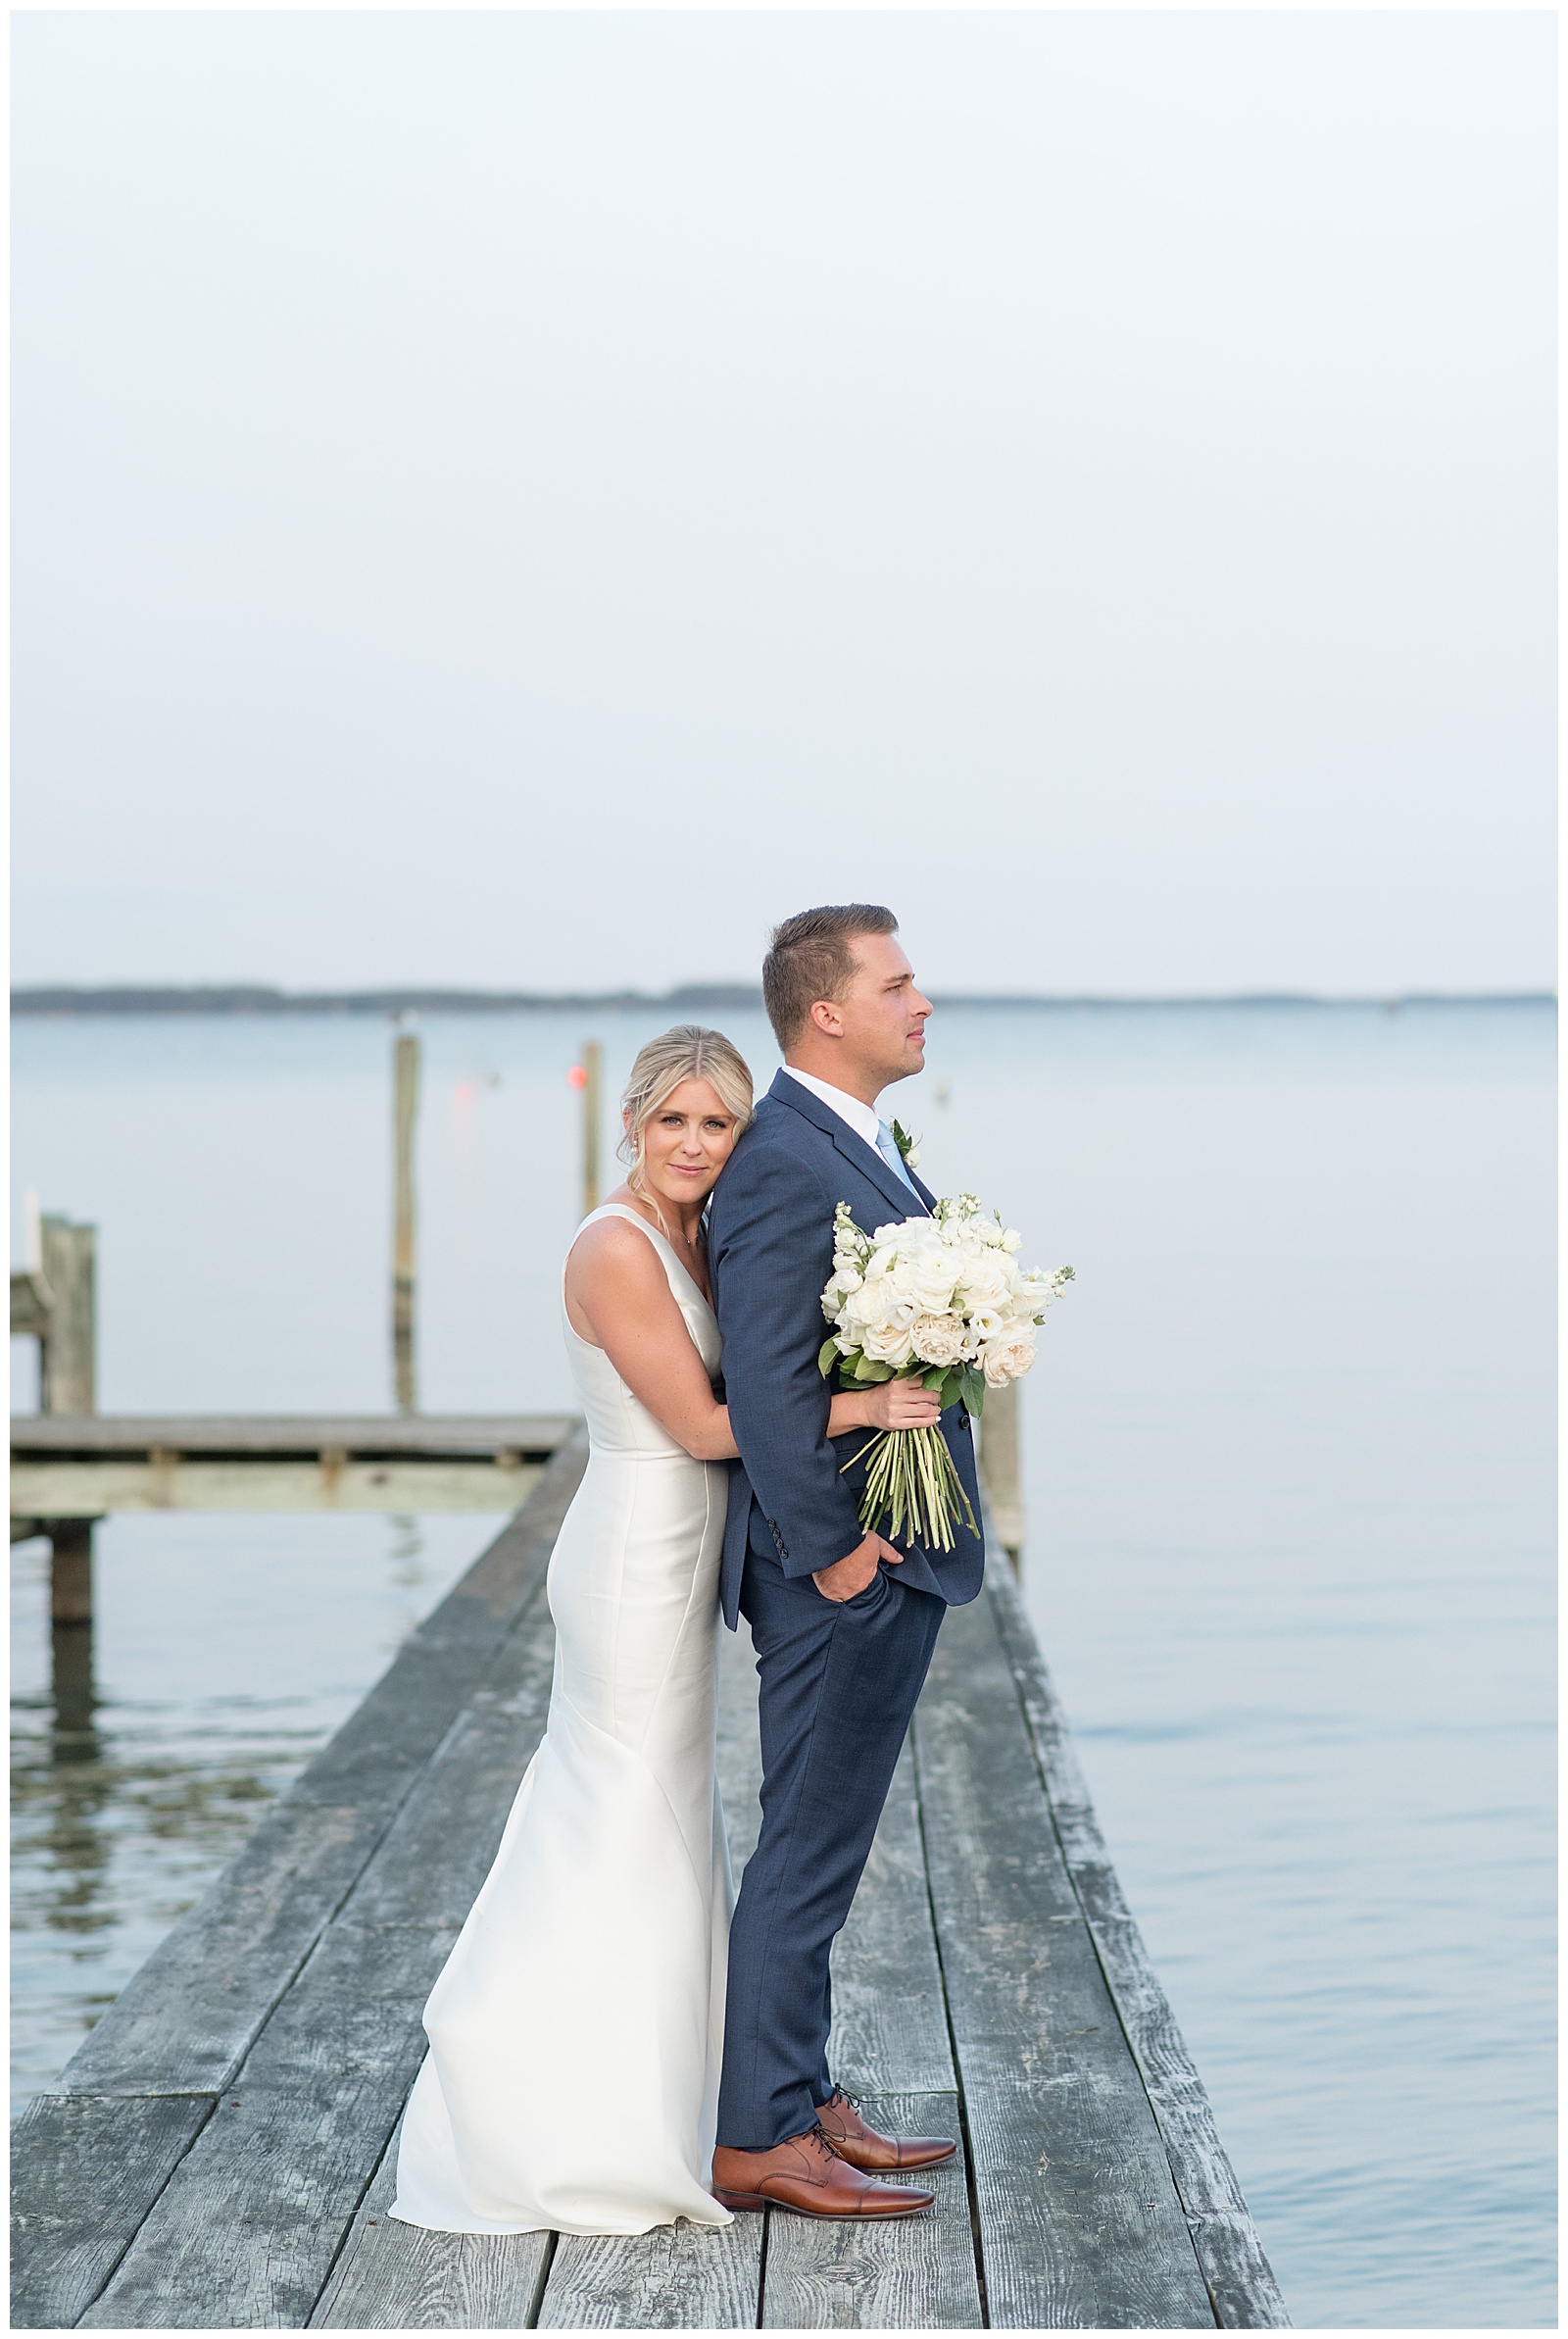 bride hugging her groom from behind on dock with ocean behind them as she smiles at camera at tilghman island